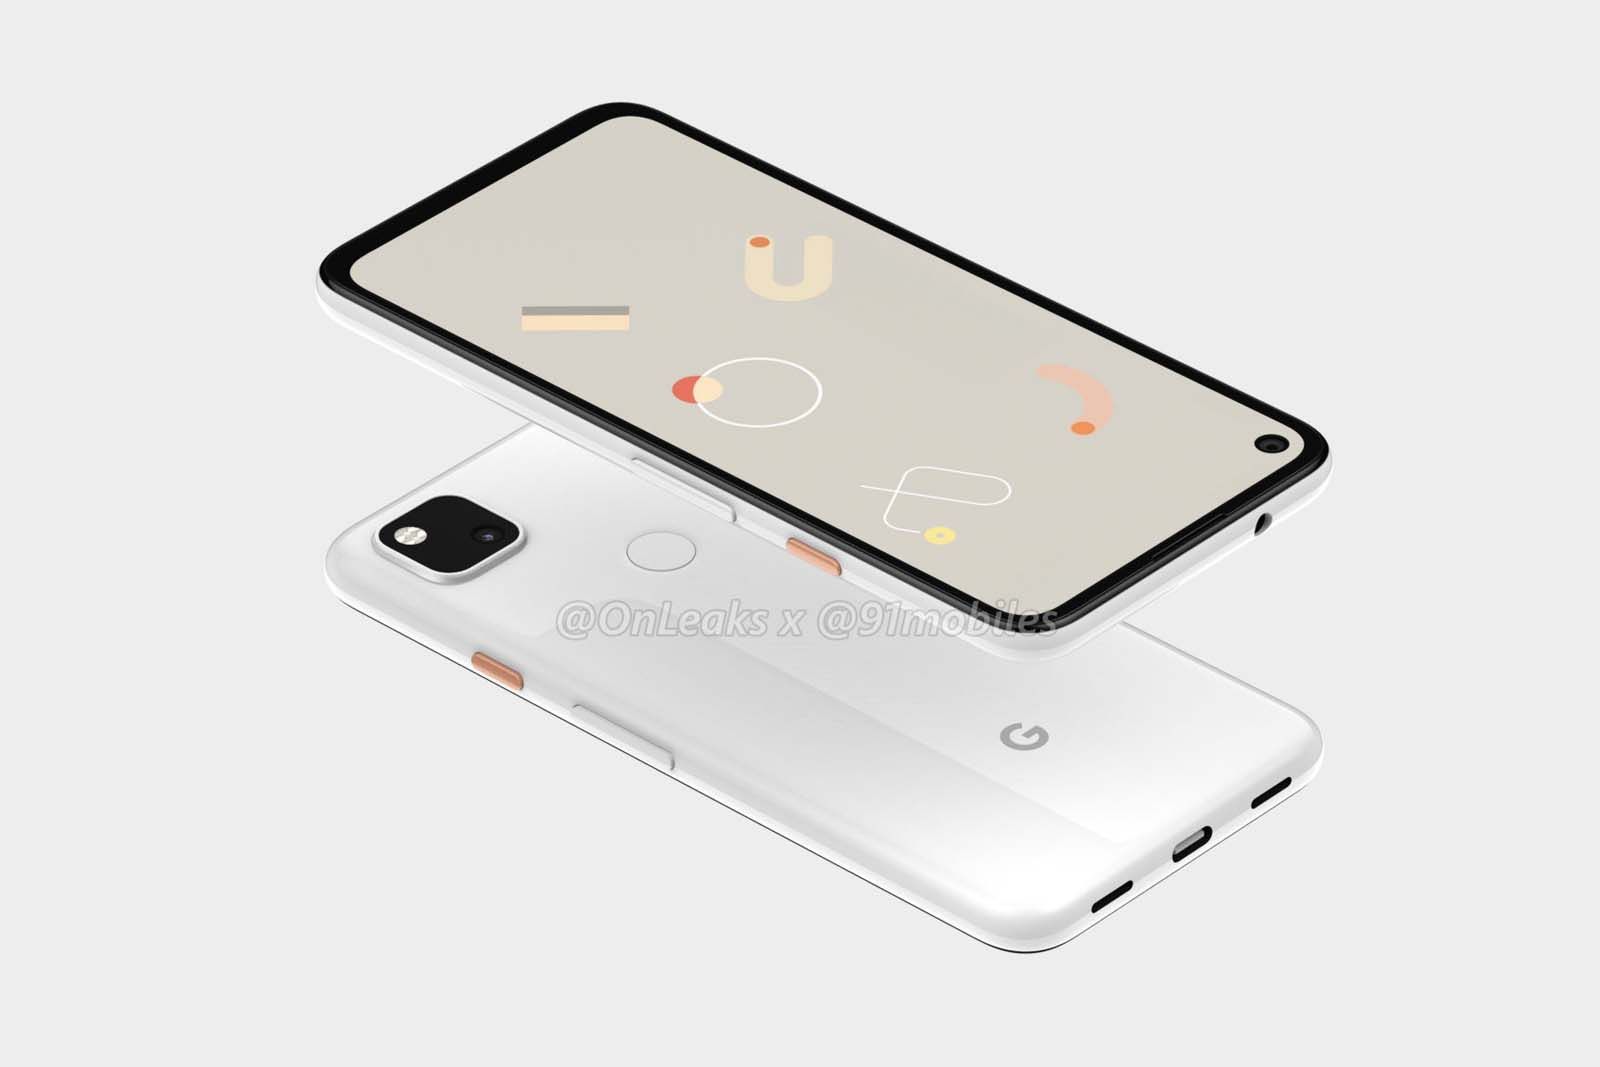 First Google Pixel 4a photos suggest it will have a killer camera image 1